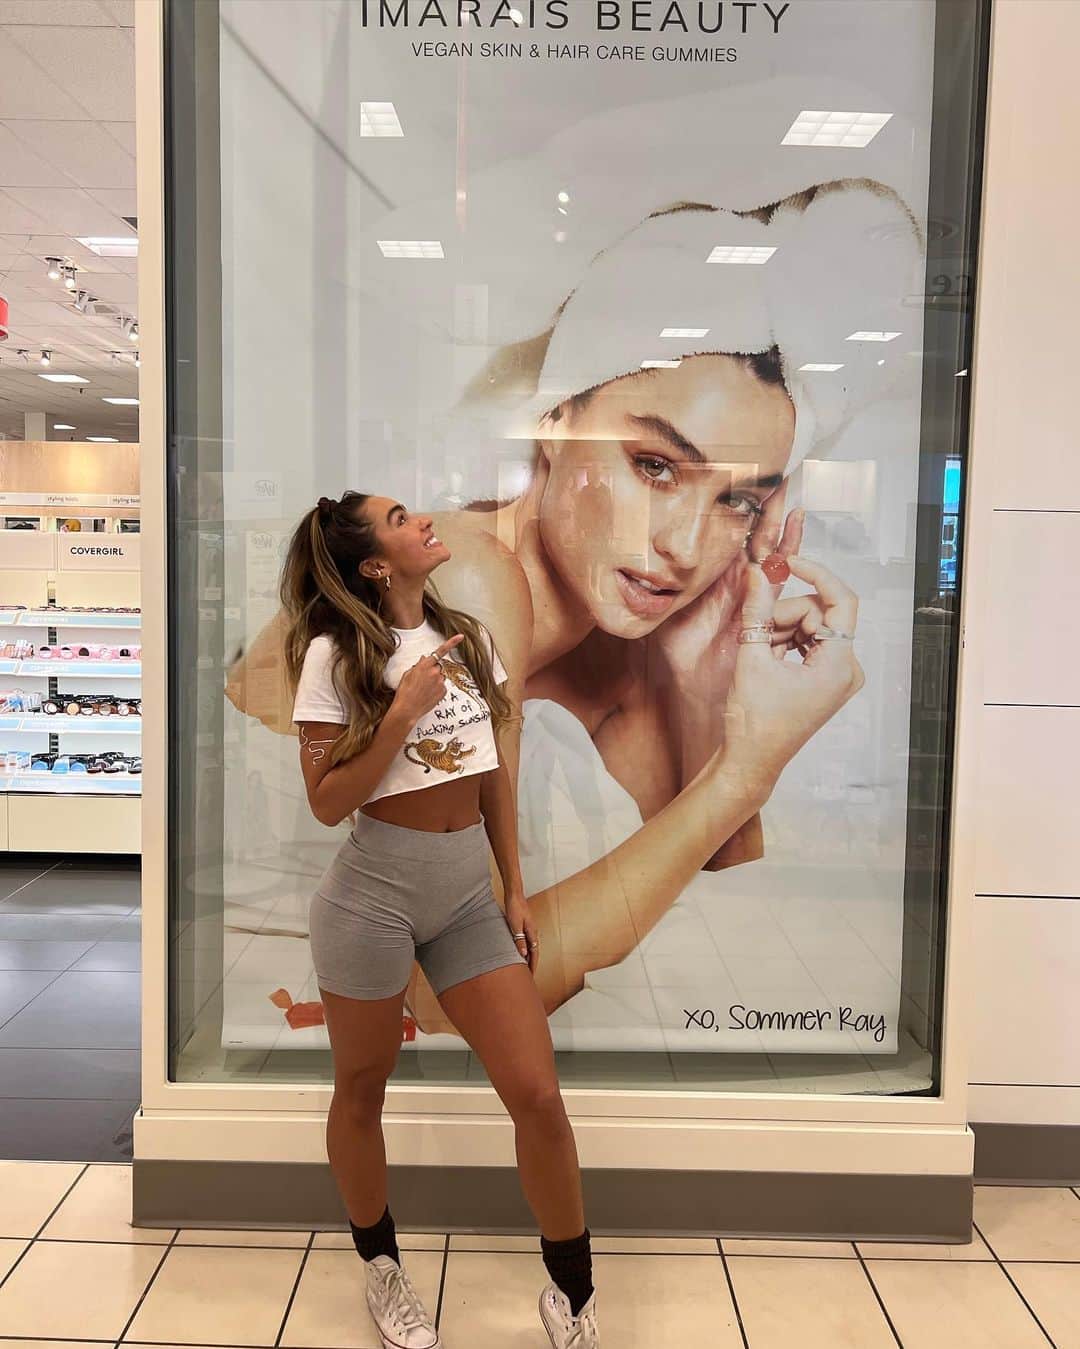 Sommer Rayのインスタグラム：「the best woman’s day everrr! thank you soooo so so much @jcpenney! @imaraisbeauty launched in select stores & online at @jcpenney ❤️‍🔥❤️‍🔥 (posted all the pics we took cause couldn’t decide on one lol like always)」